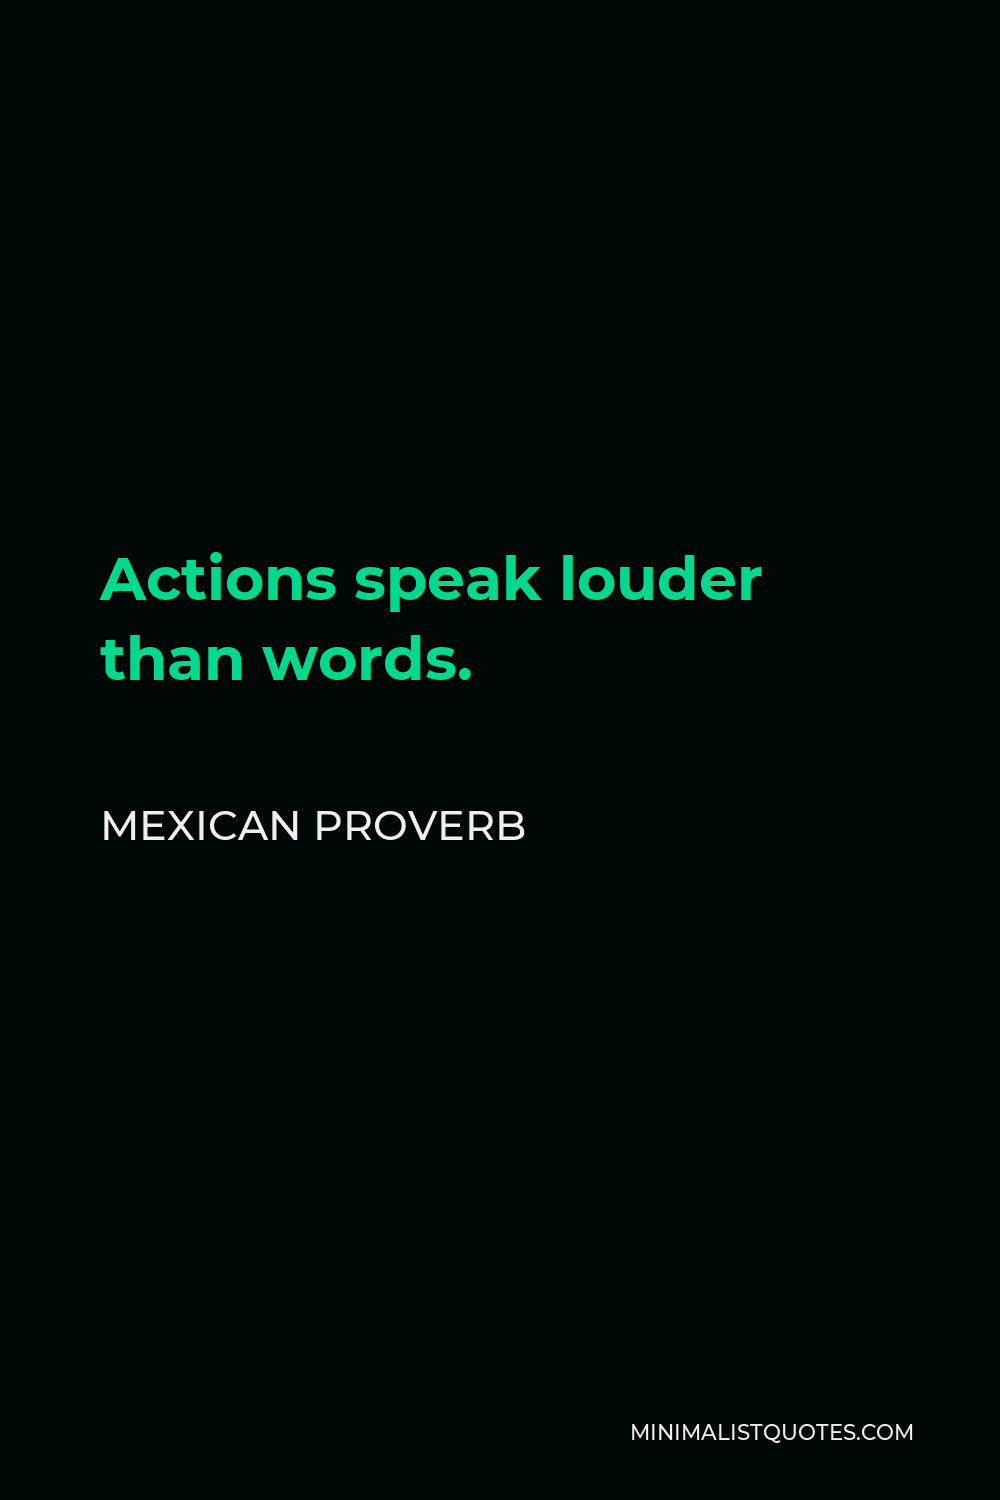 Mexican Proverb Quote - Actions speak louder than words.